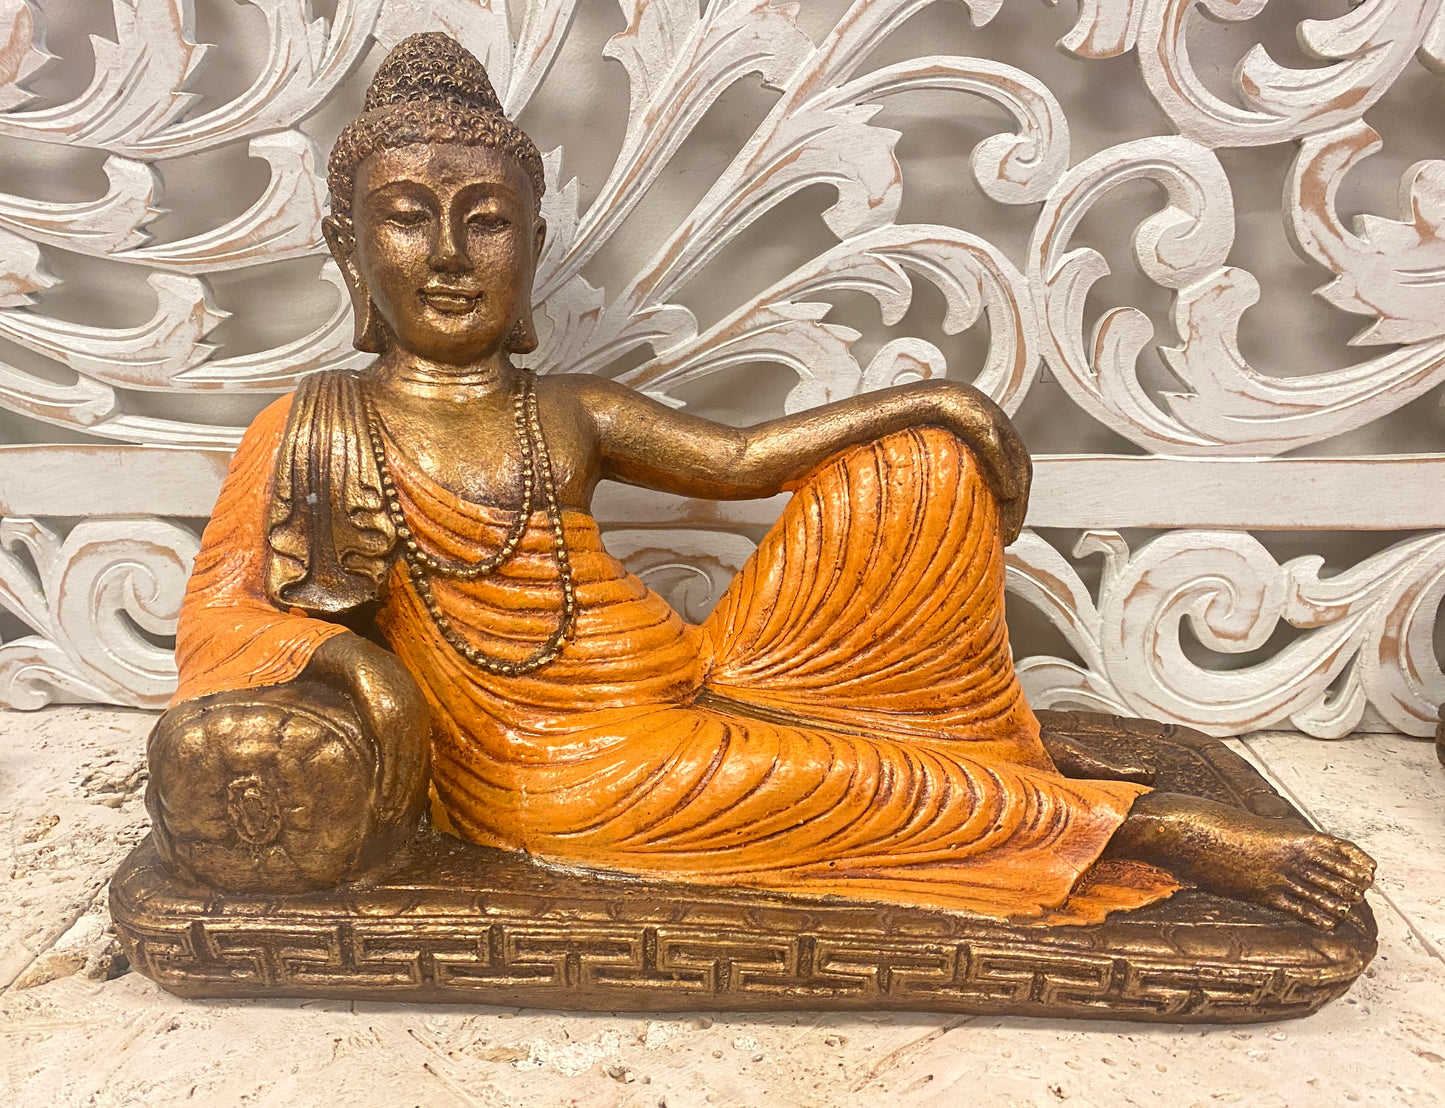 XL Resin Reclining Buddha Statues - Available in 4 Colors 40cm x 30cm